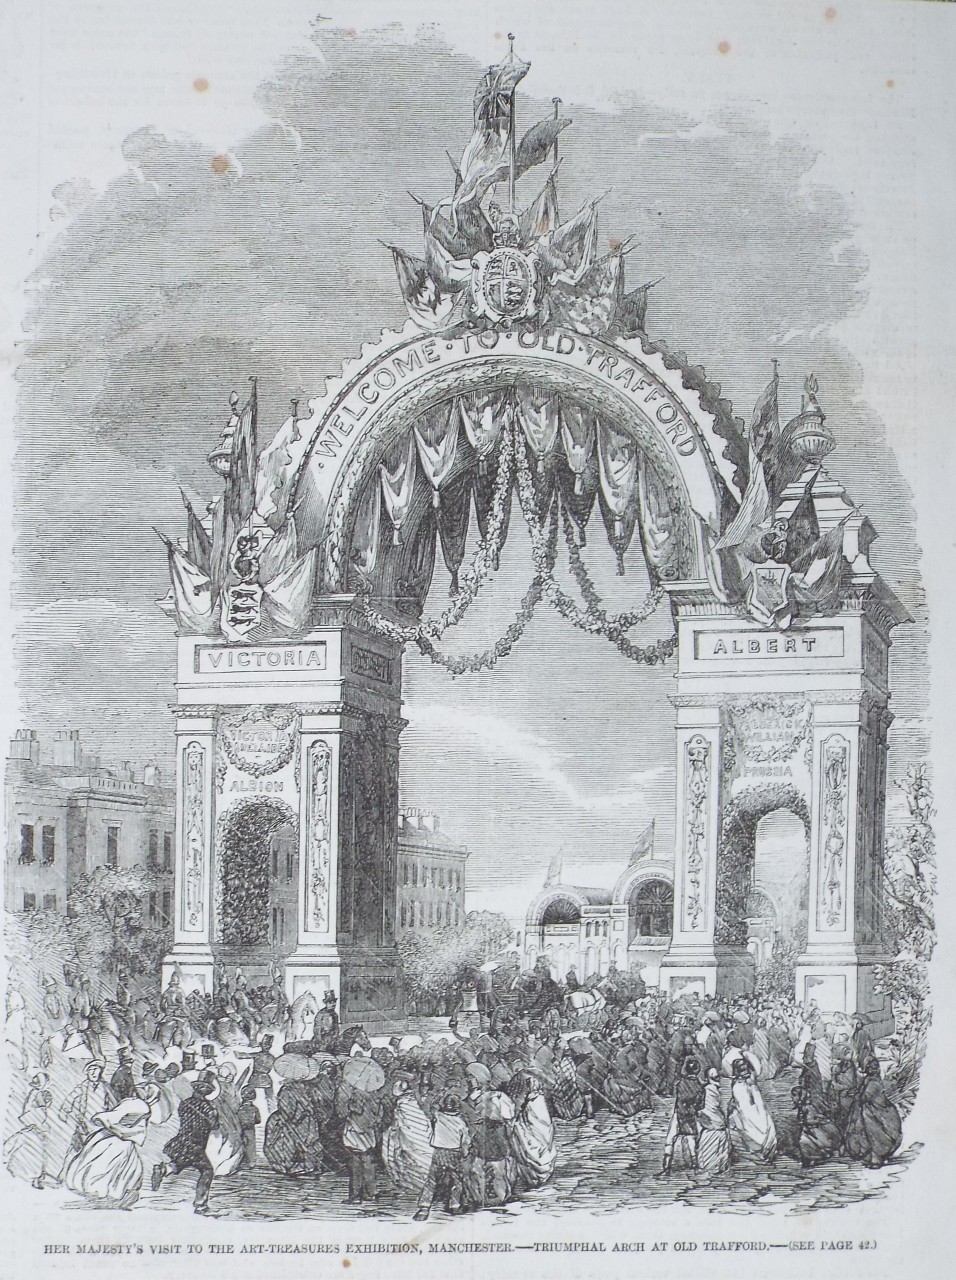 Wood - His Majesty's Visit to the Art-Treasures Exhibition, Manchester. Triumphal Arch at Old Trafford.